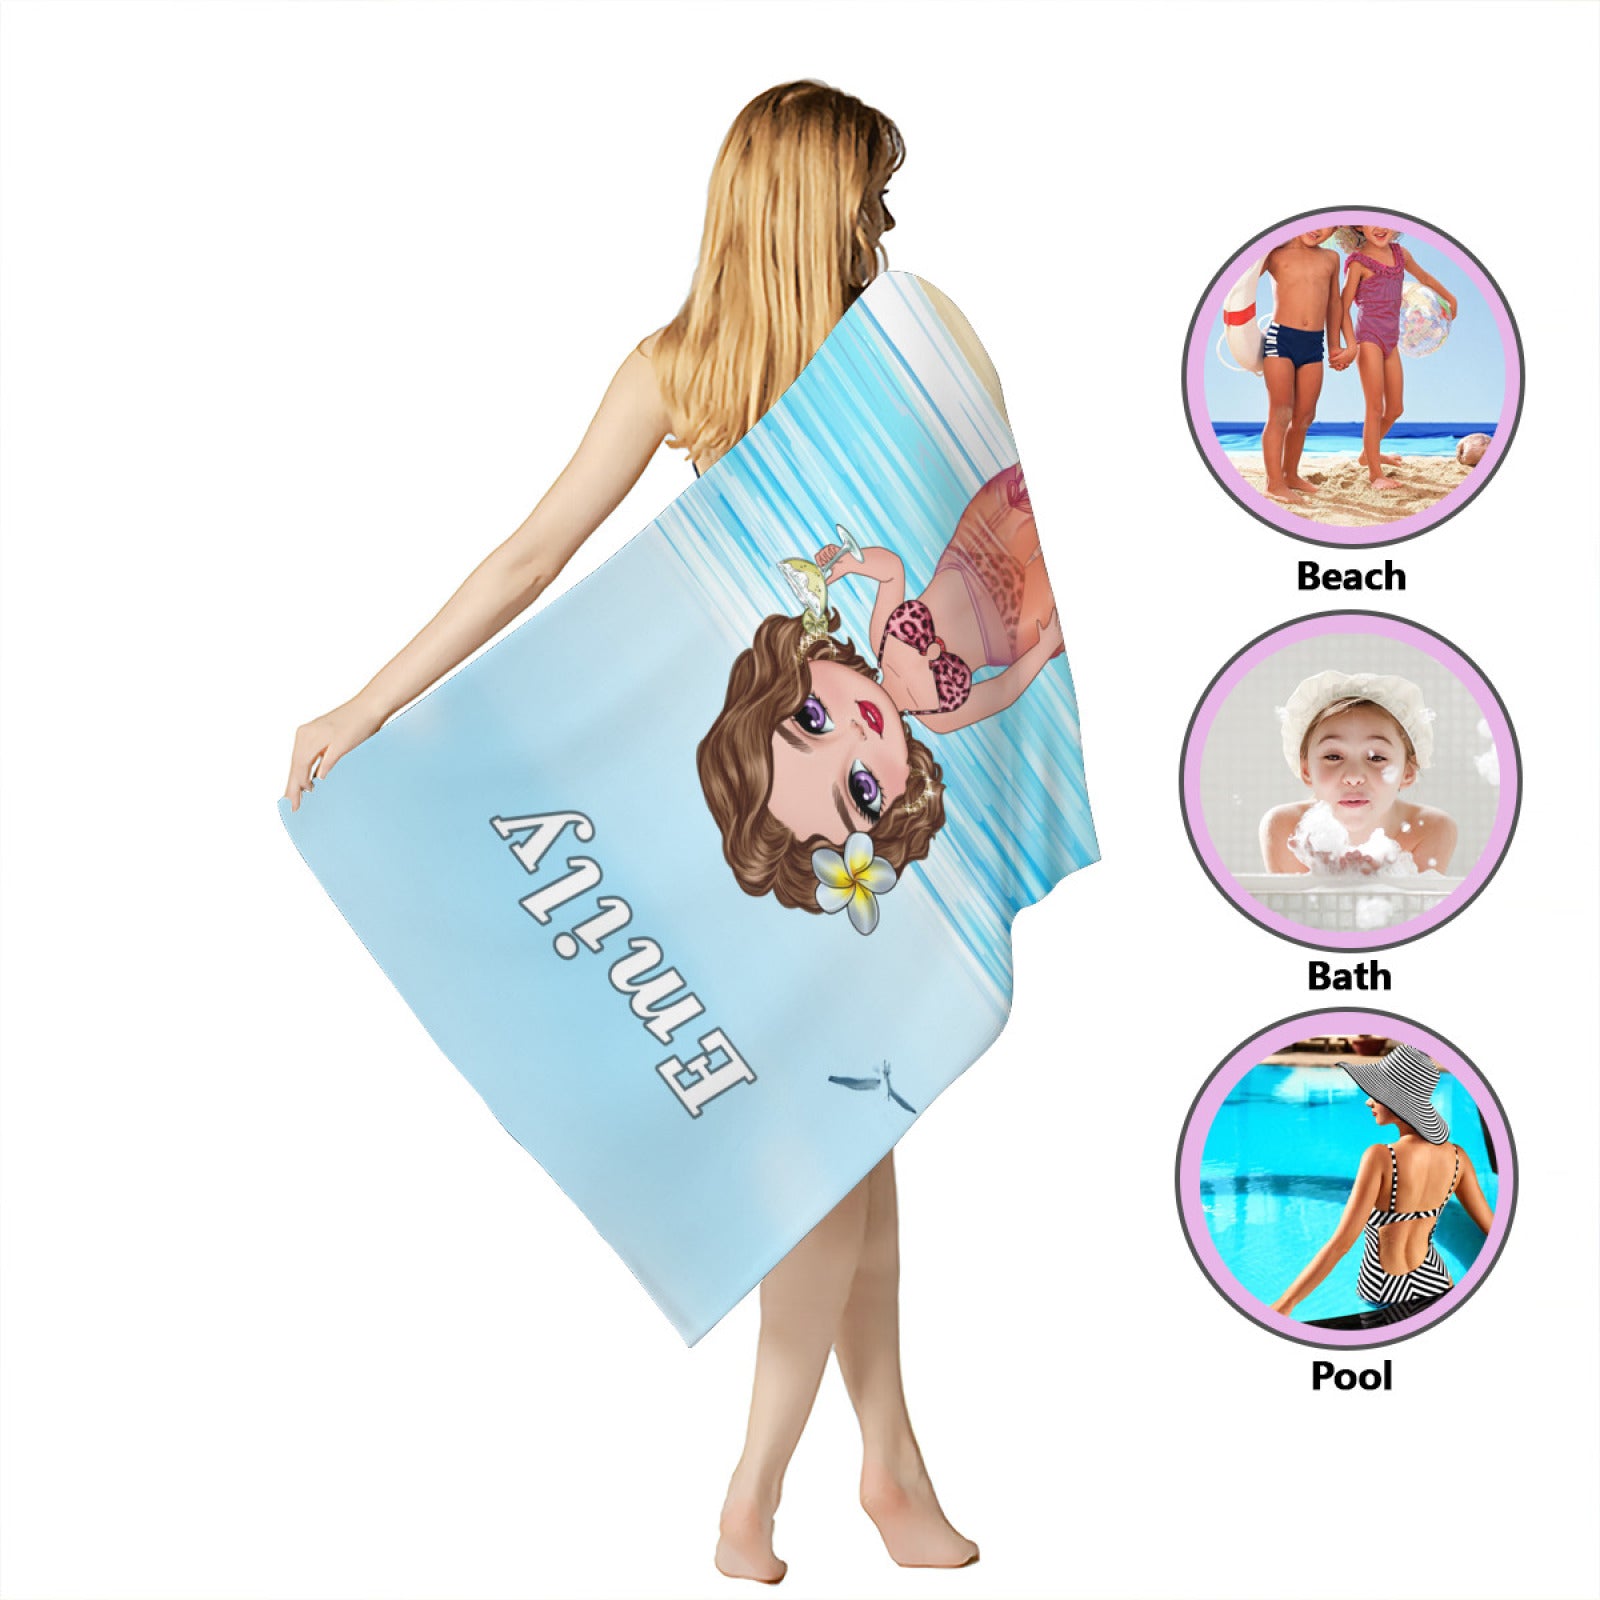 At The Beach Pool Party - Personalized Beach Custom Beach Towel - Gifts For Friends,Gift For Family, Gift For Kids, Christmas Gift - colorfulcustom